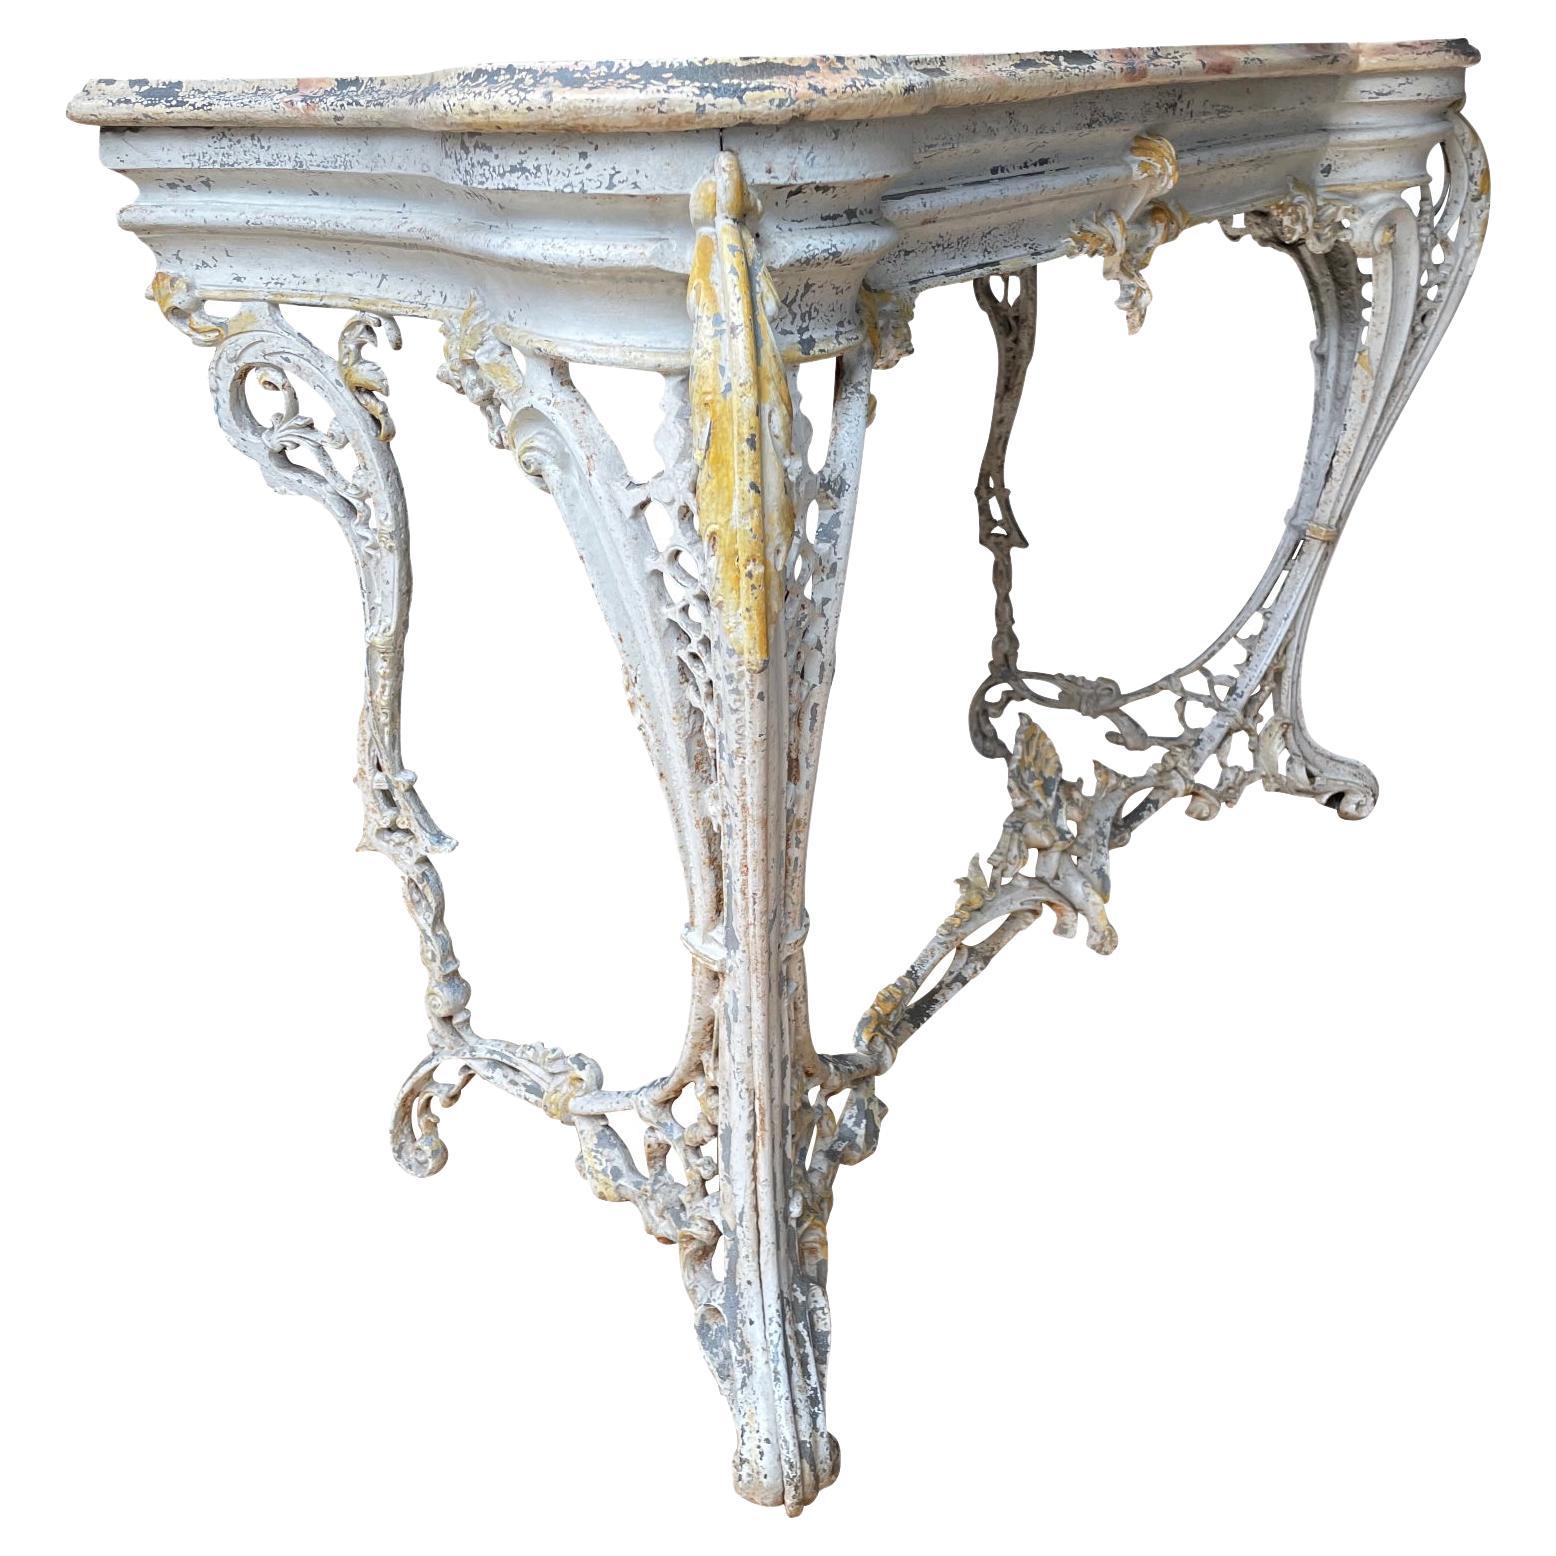 Rare Cast Iron Console by the English Foundry of Coalbrookdale